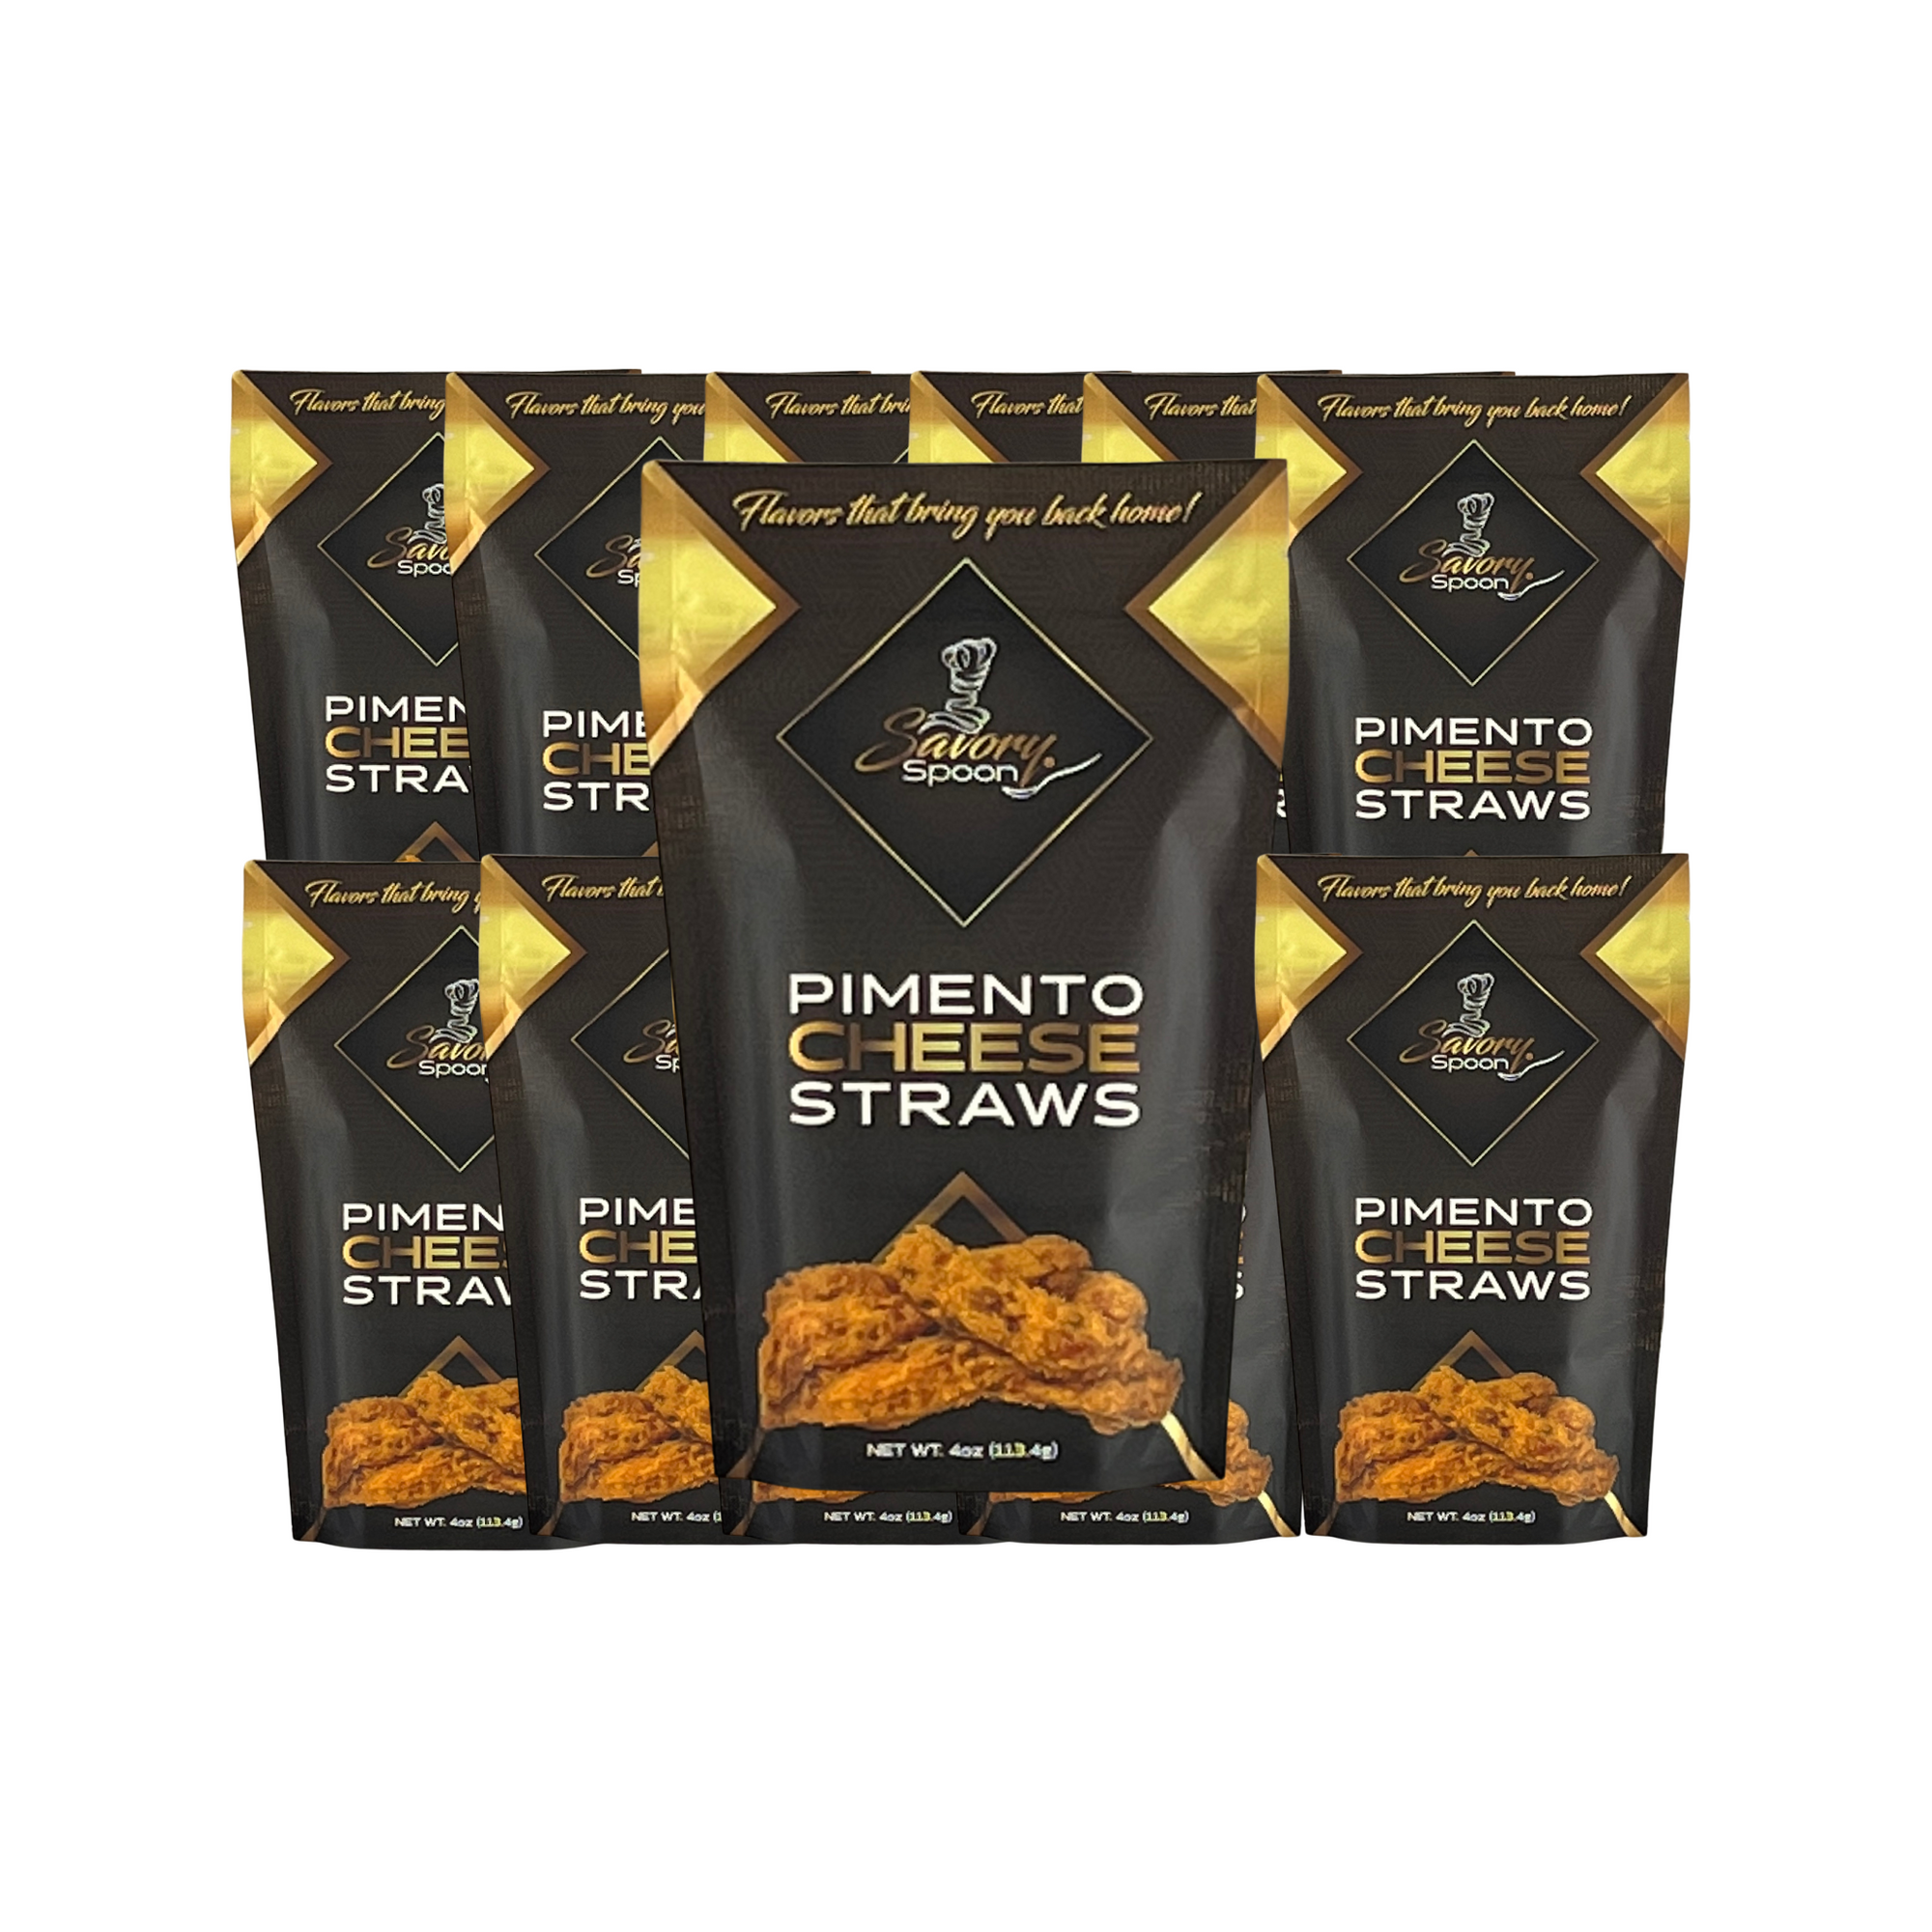 Pimento Cheese Straws - 12 Bags + Free Shipping -Due to High Demand, alternate packaging may be used for one or more products!